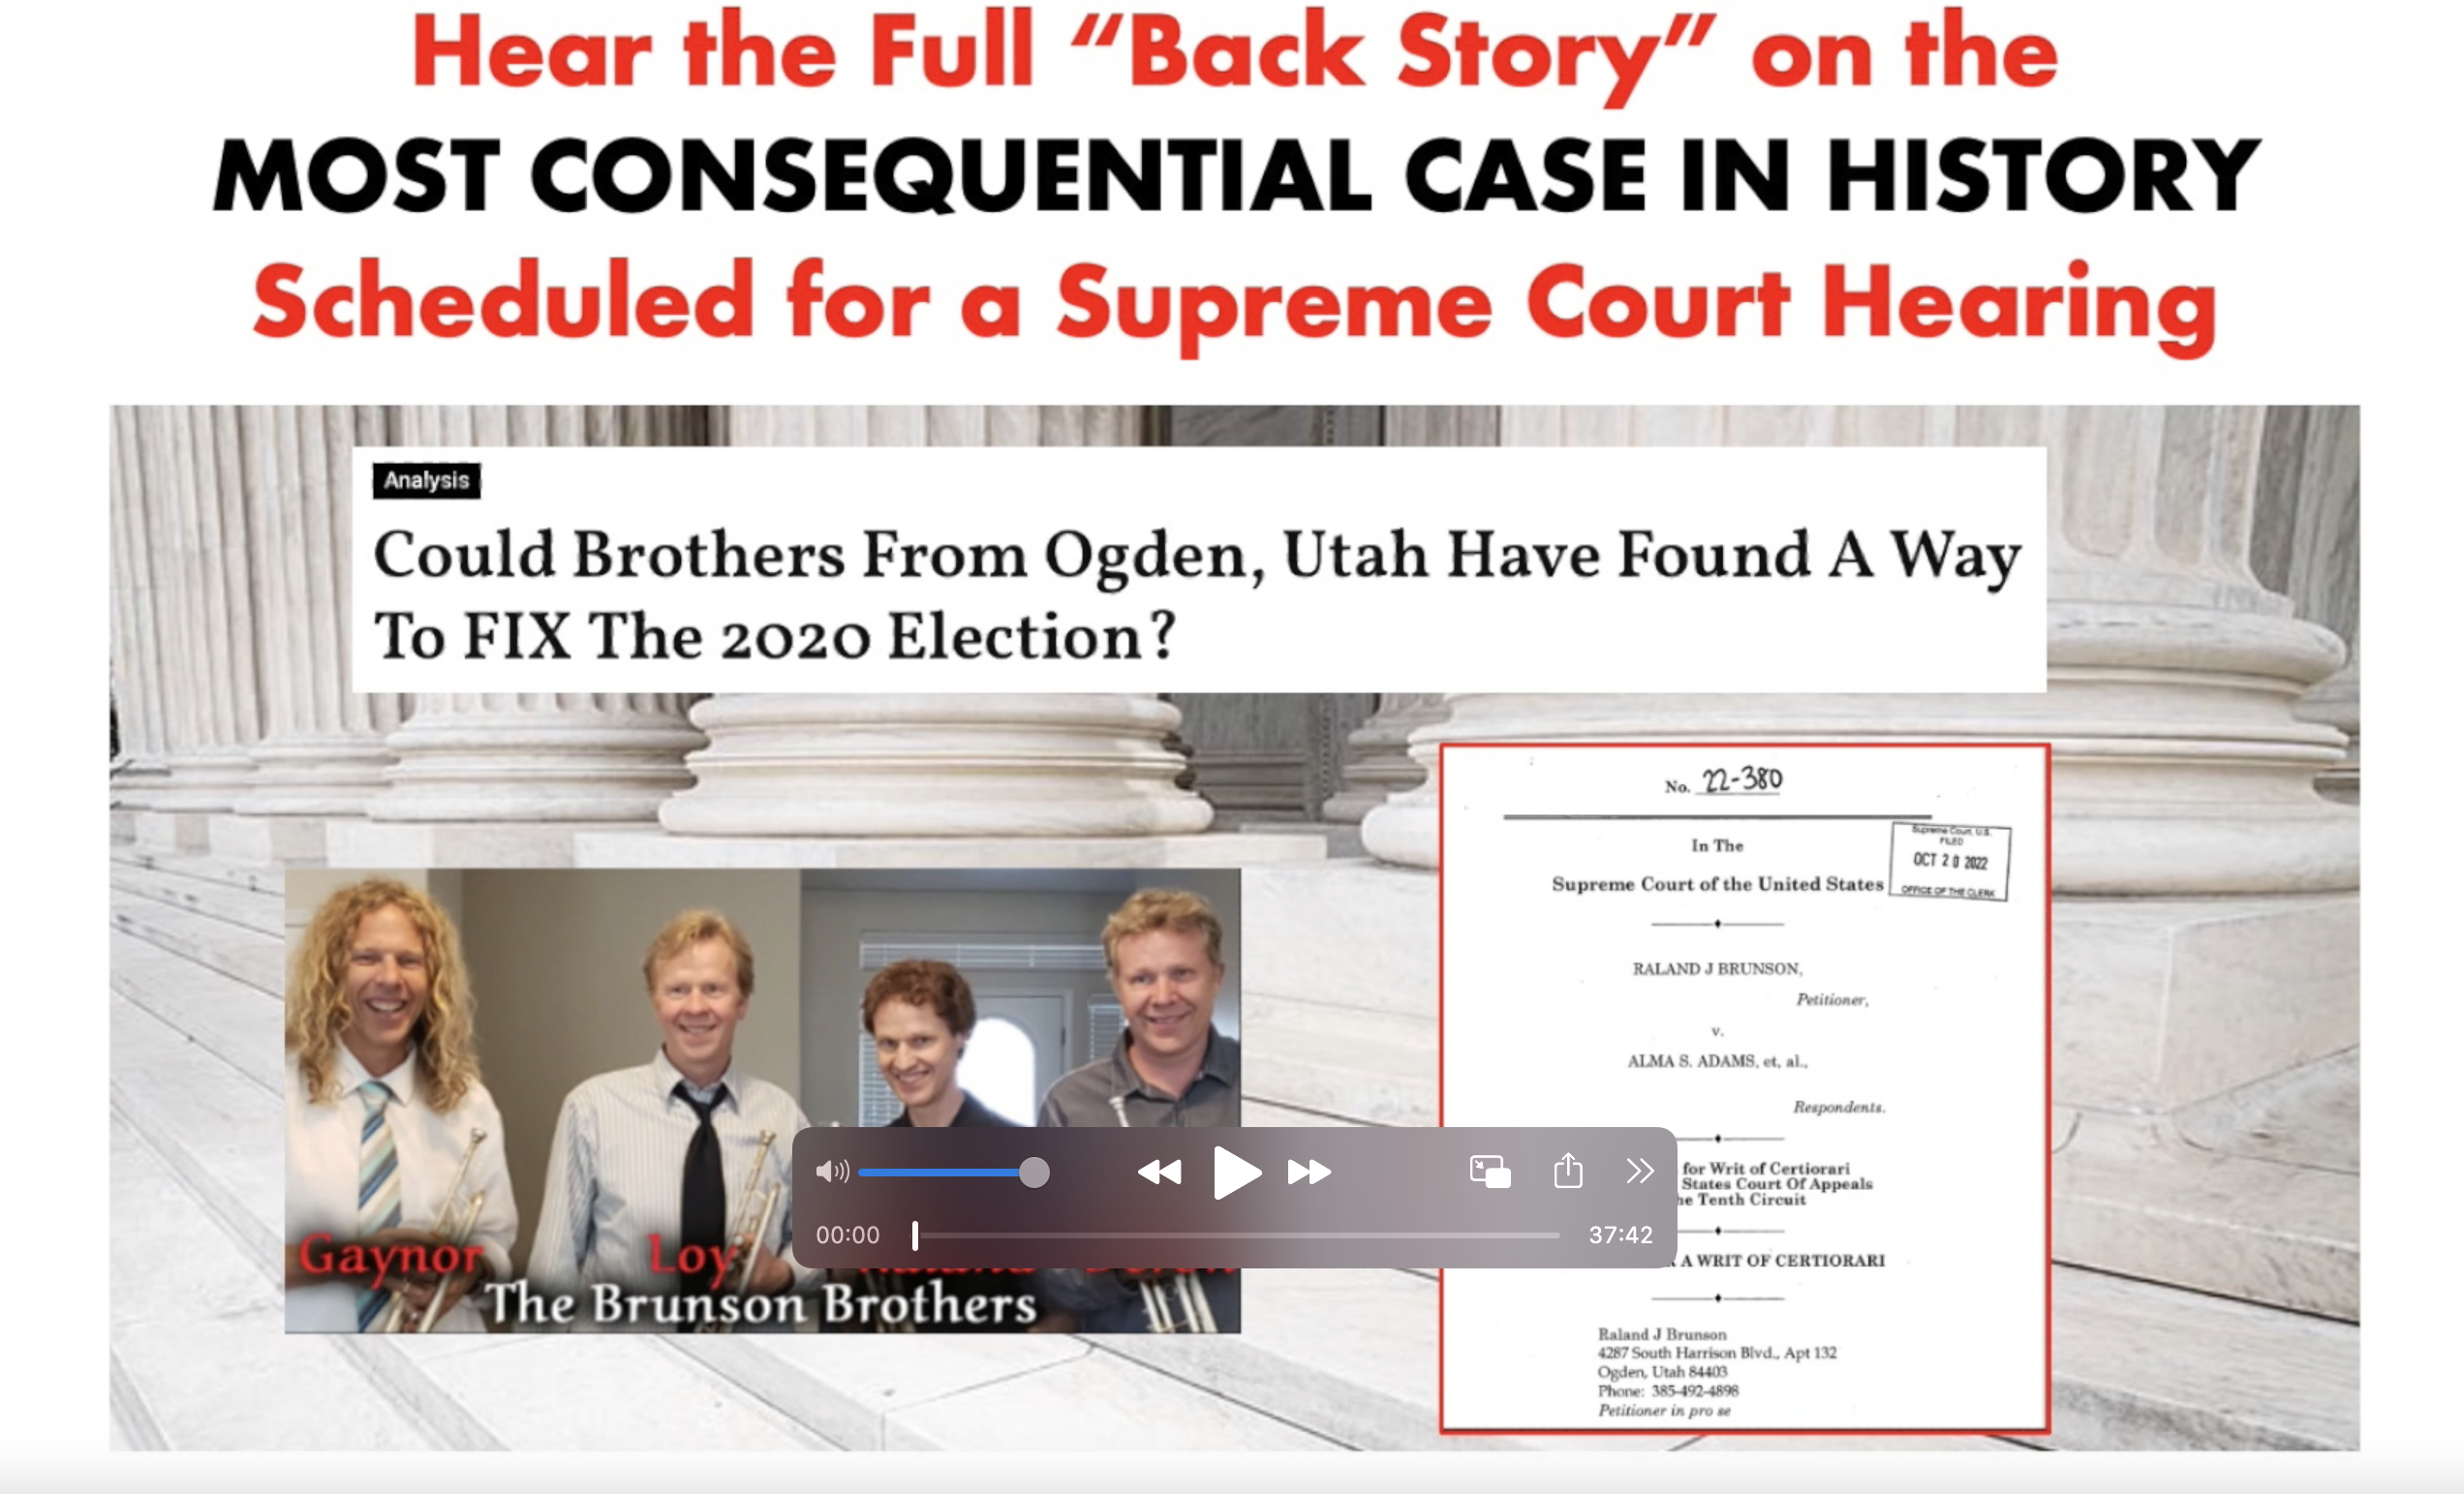 Analysis Of 'The Brunson Case' Scheduled Before SCOTUS - The Most Consequential Election Fraud Case?